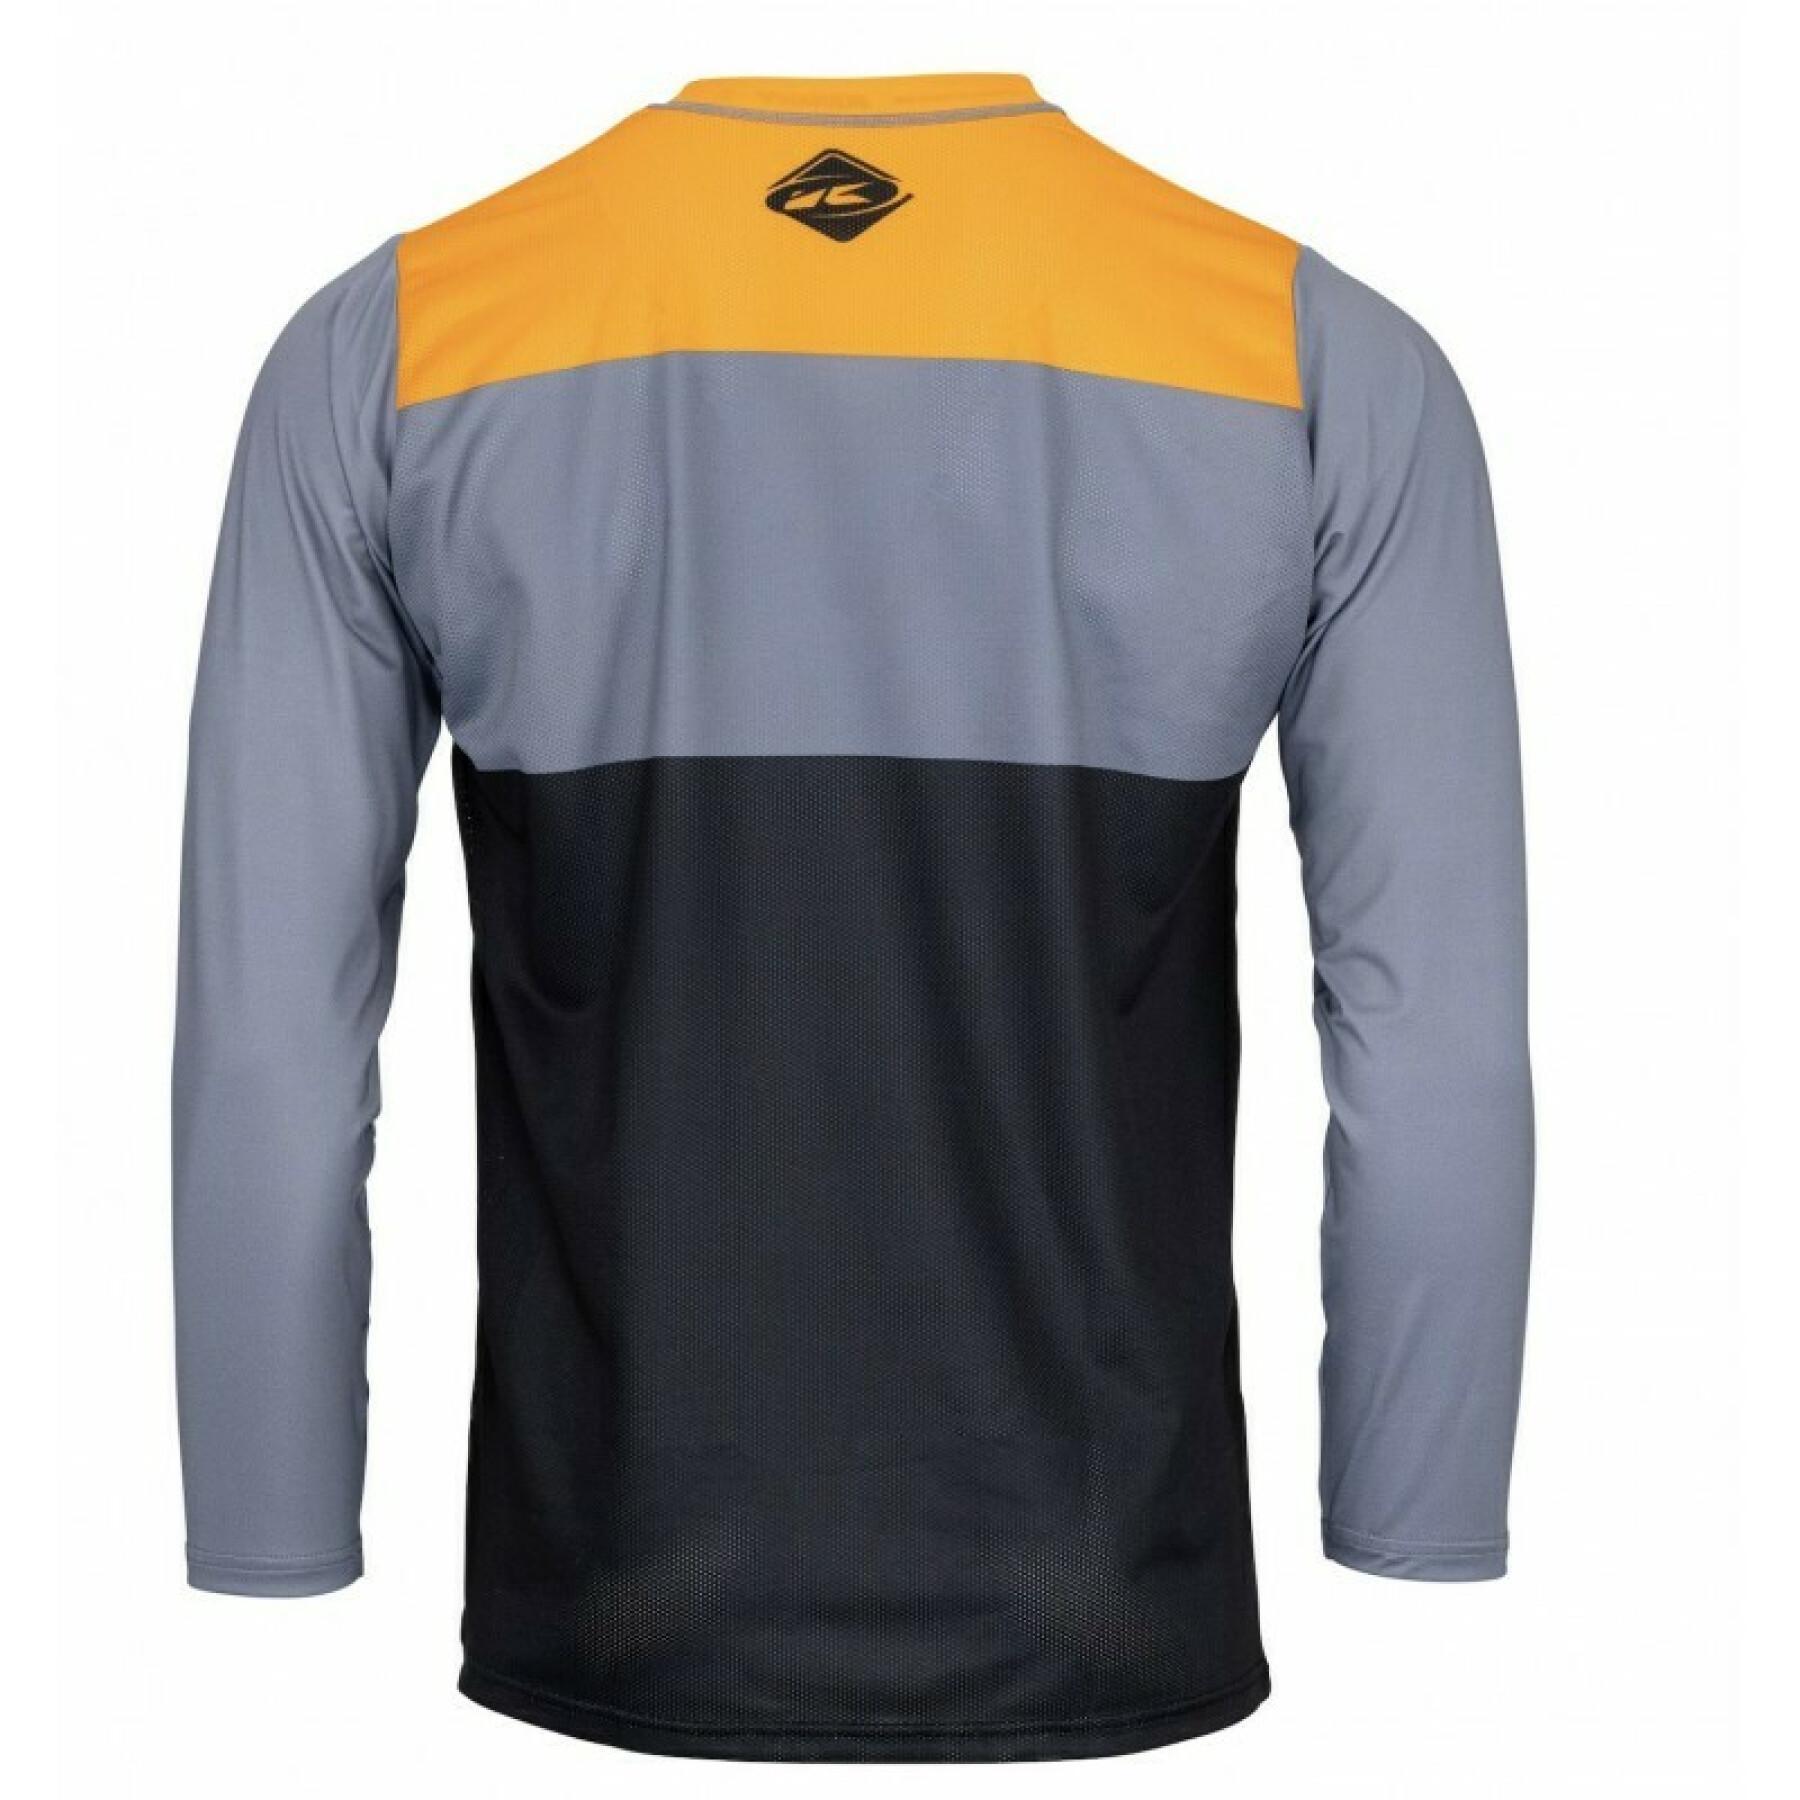 Maillot manches longues Kenny Charger